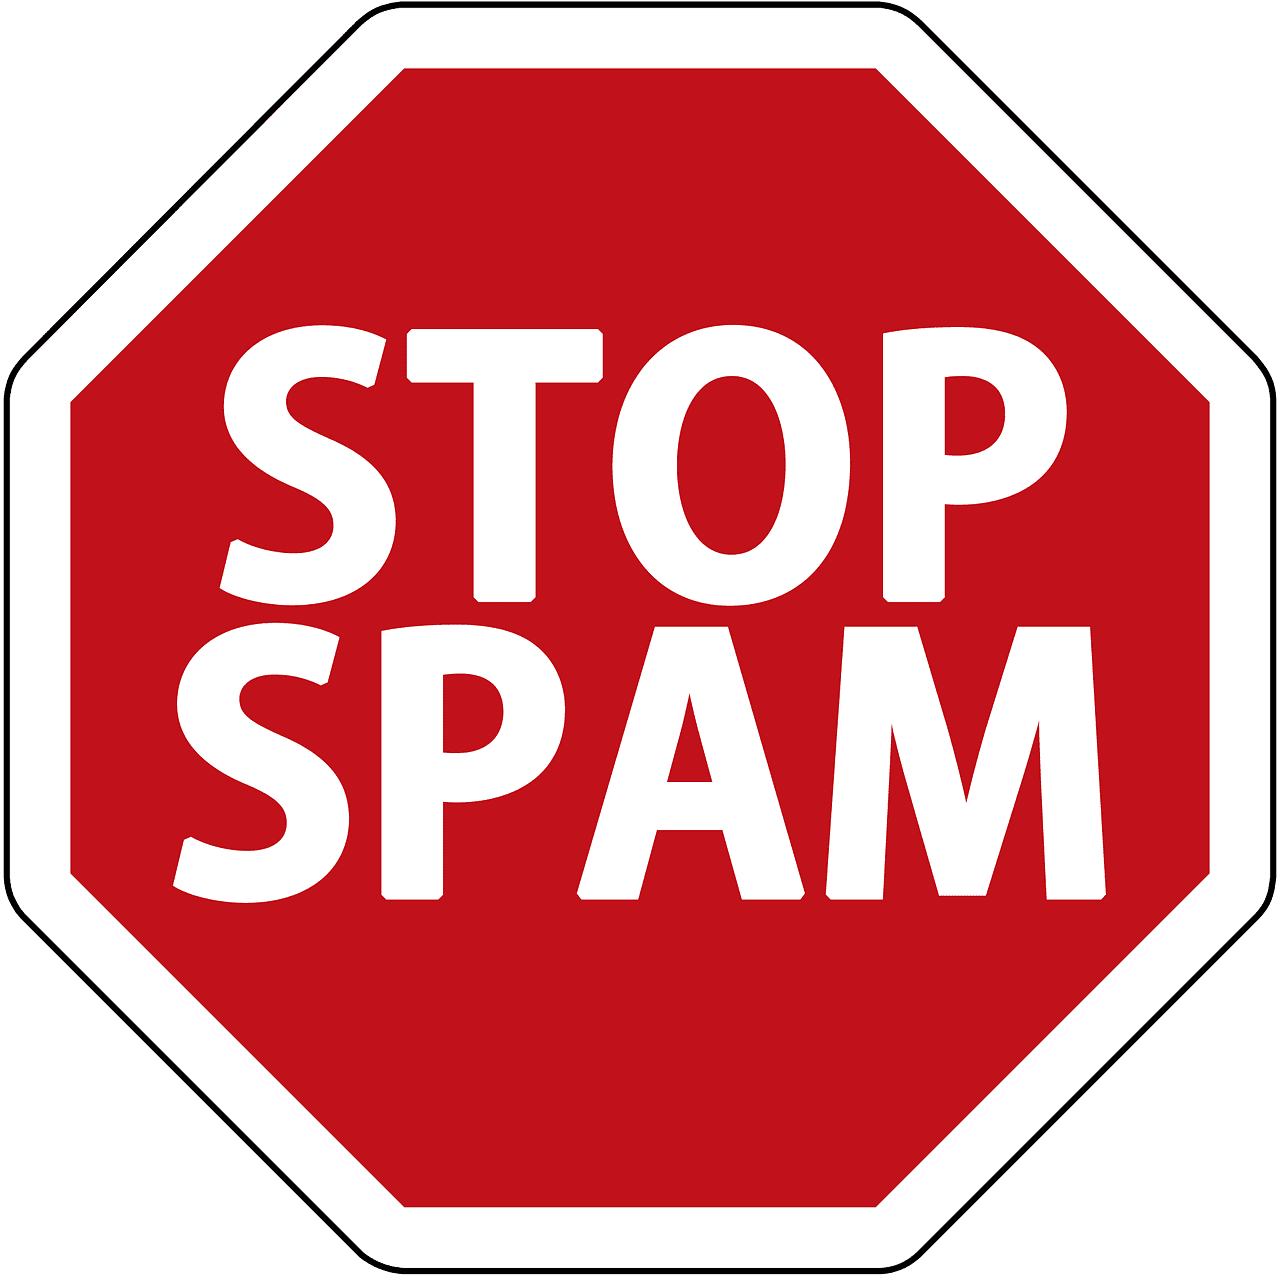 How to ID a Spoof message that looks legitimate - Stop Spam